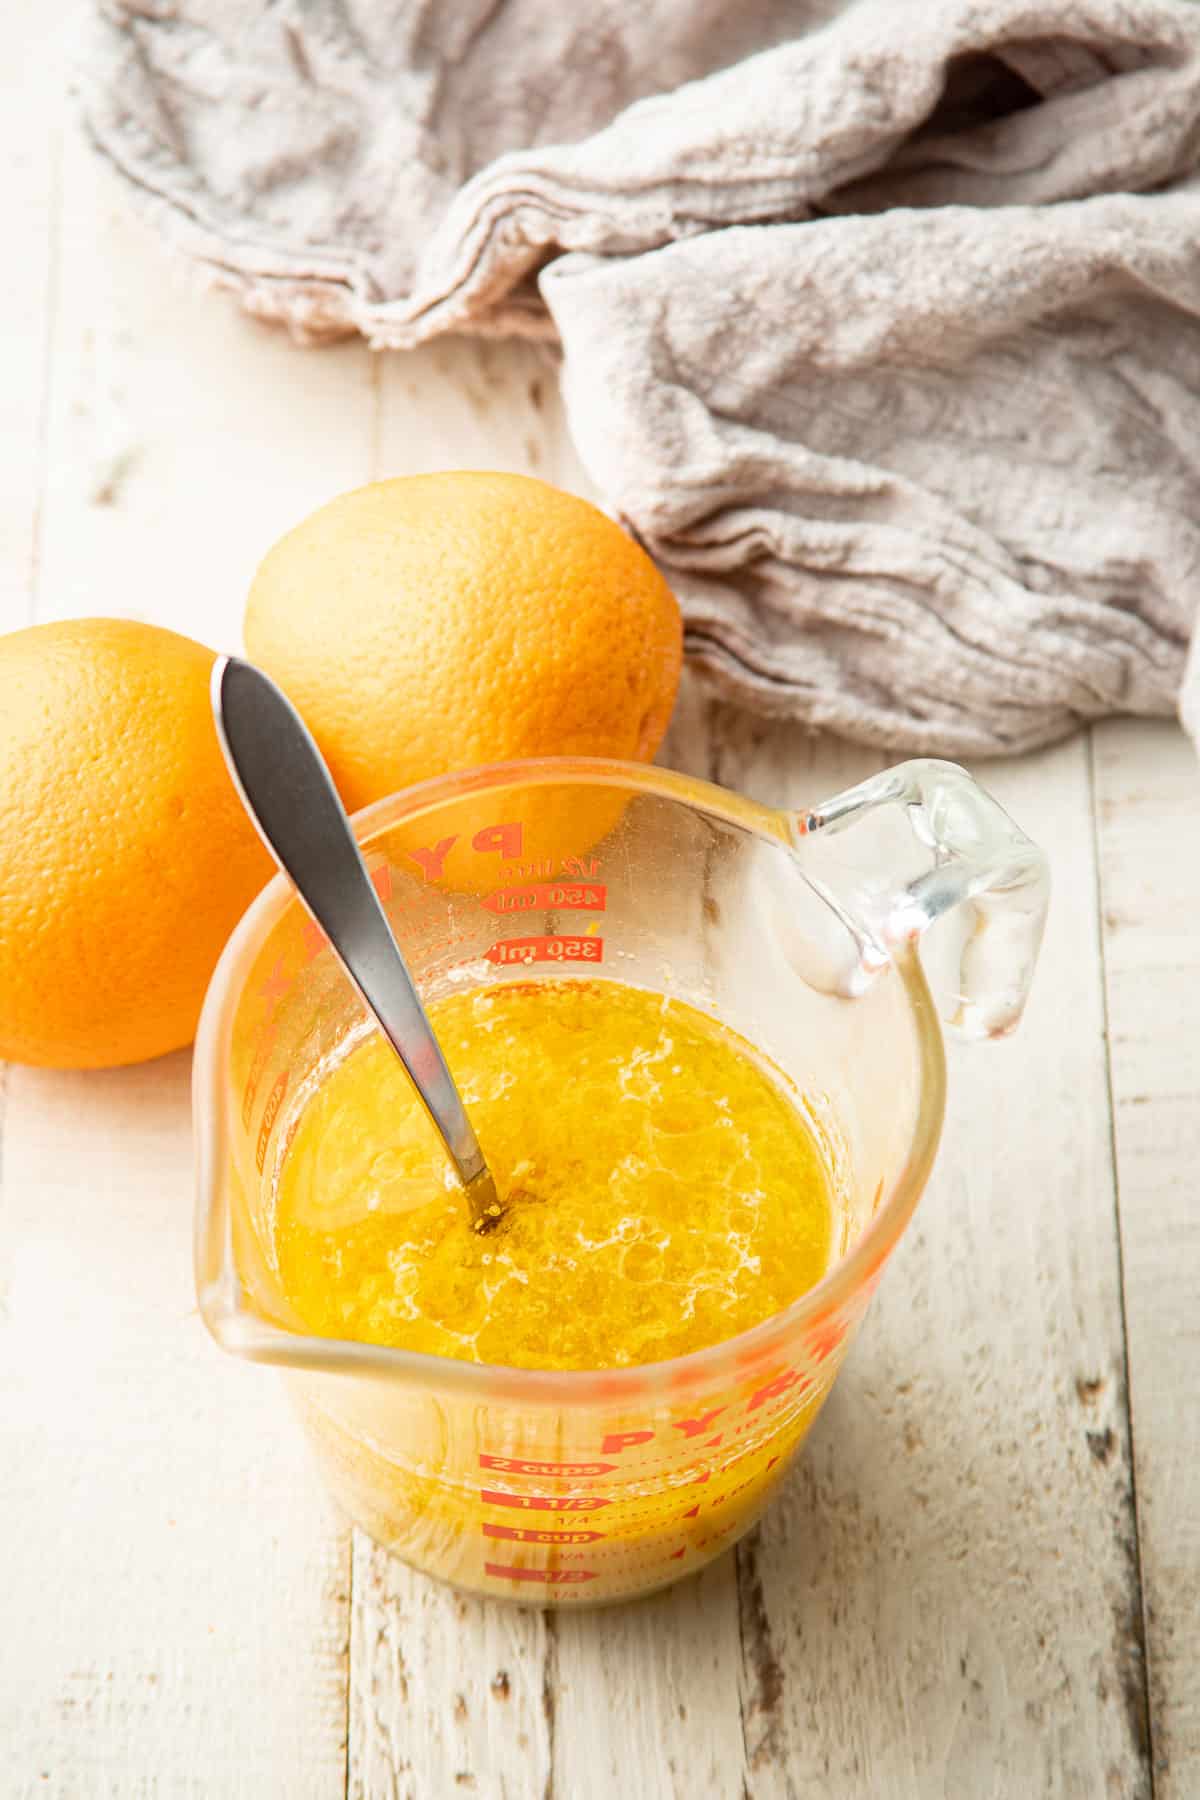 Measuring cup with liquid ingredients for orange cake.